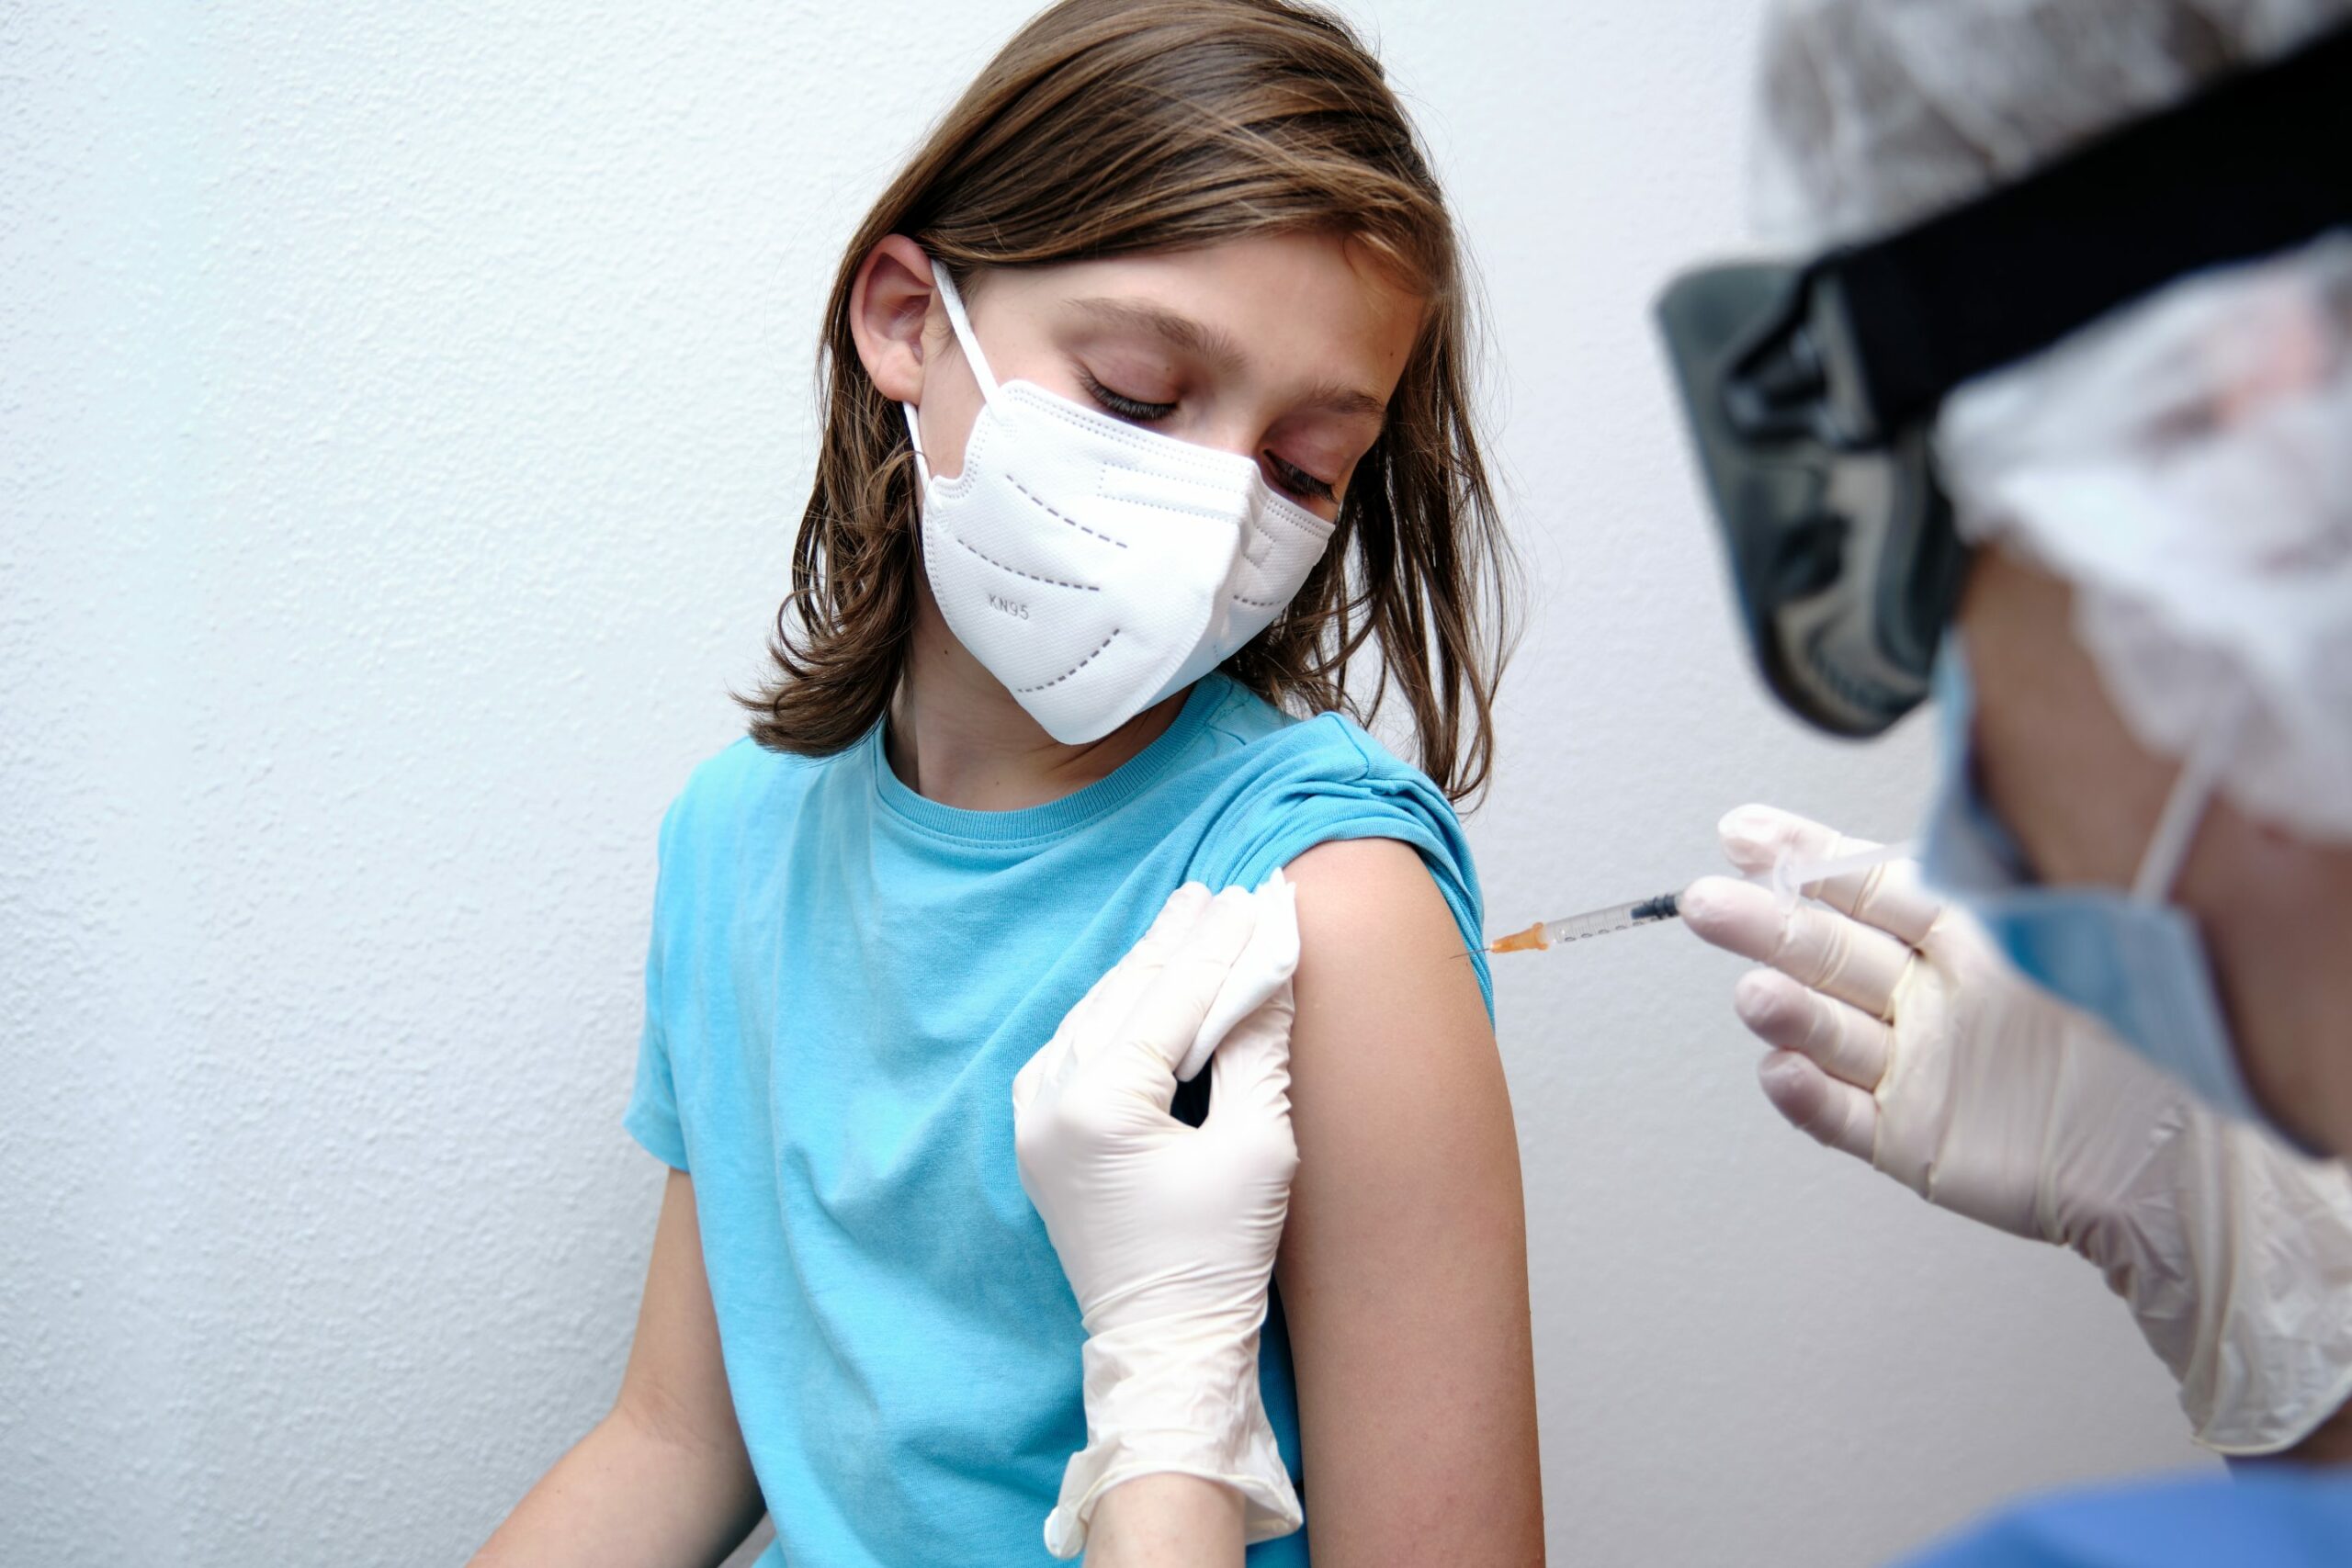 Vaccination for 12-14 Age Group may Begin in March